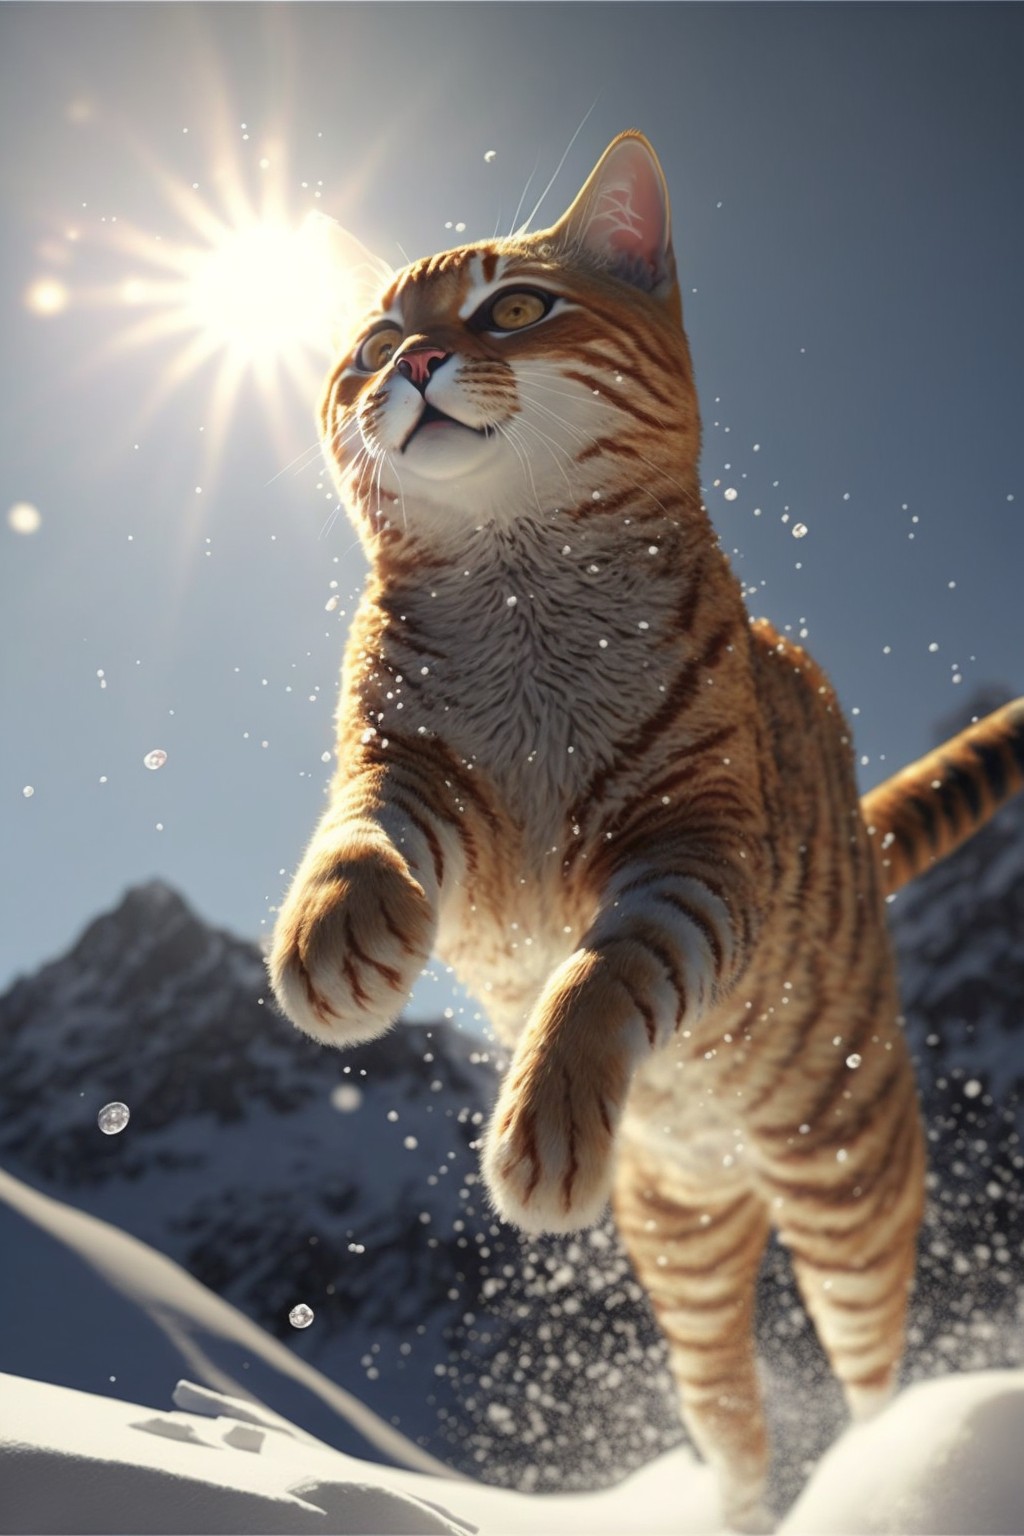 5 images of Silly cat jumping happily in the snow by Midjourney